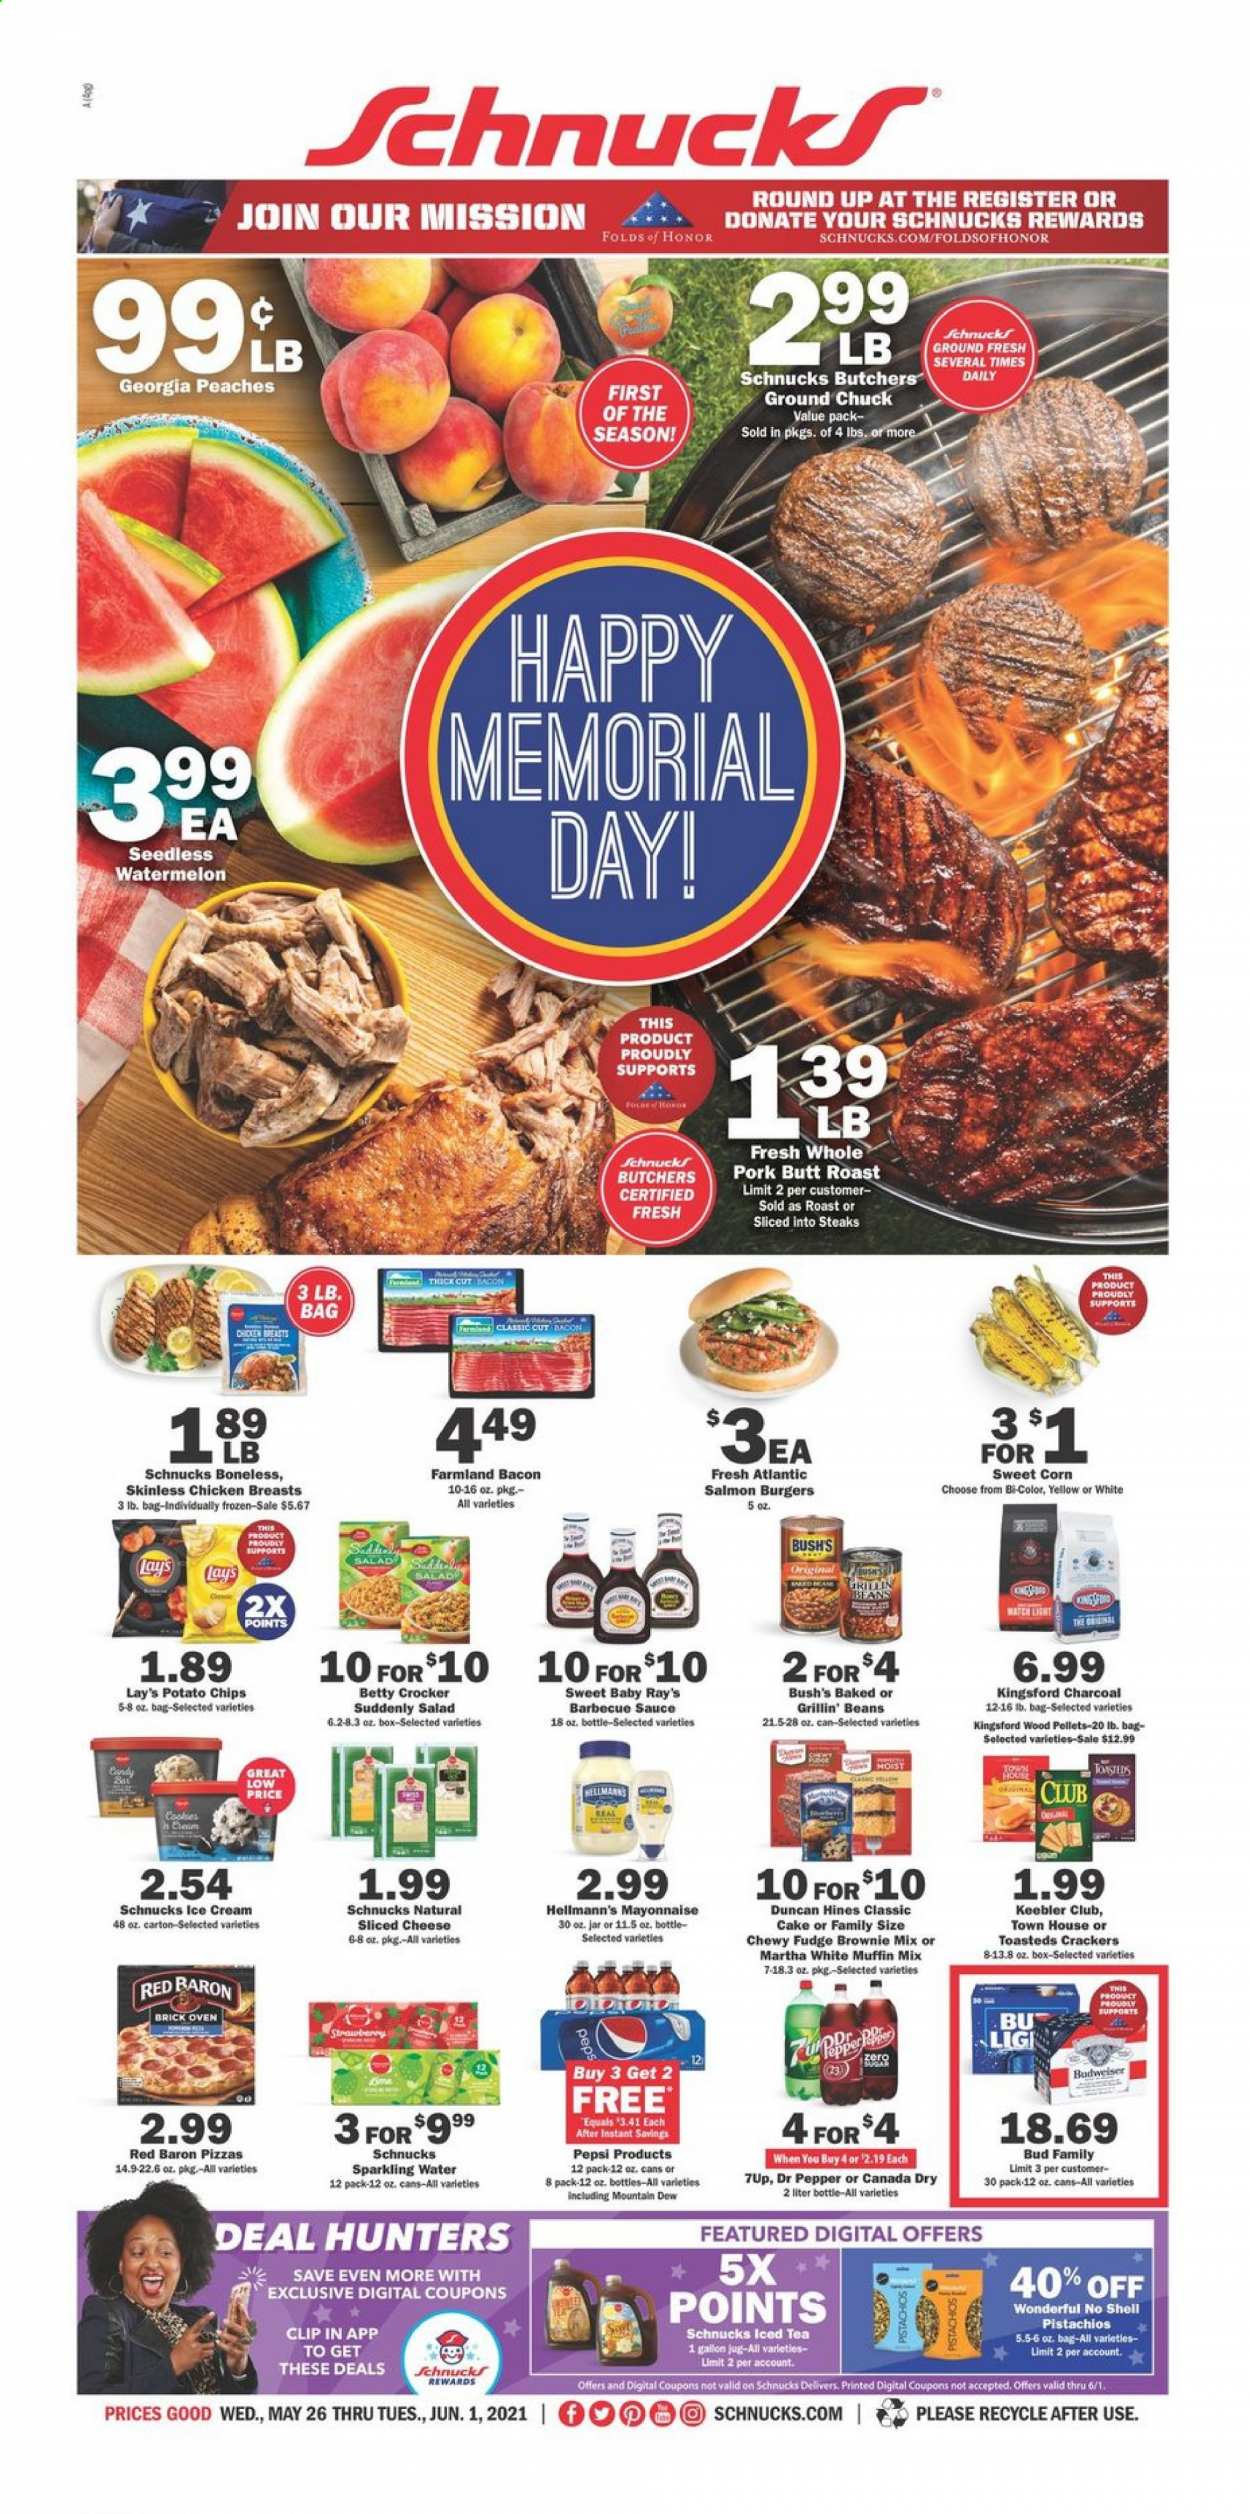 thumbnail - Schnucks Flyer - 05/26/2021 - 06/01/2021 - Sales products - Budweiser, cake, brownie mix, muffin mix, beans, corn, salad, sweet corn, watermelon, salmon, pizza, hamburger, sauce, bacon, sliced cheese, cheese, mayonnaise, Hellmann’s, ice cream, Red Baron, fudge, crackers, Keebler, potato chips, Lay’s, BBQ sauce, pistachios, Canada Dry, Mountain Dew, Pepsi, ice tea, Dr. Pepper, 7UP, sparkling water, beer, chicken breasts, ground chuck, steak, peaches. Page 1.